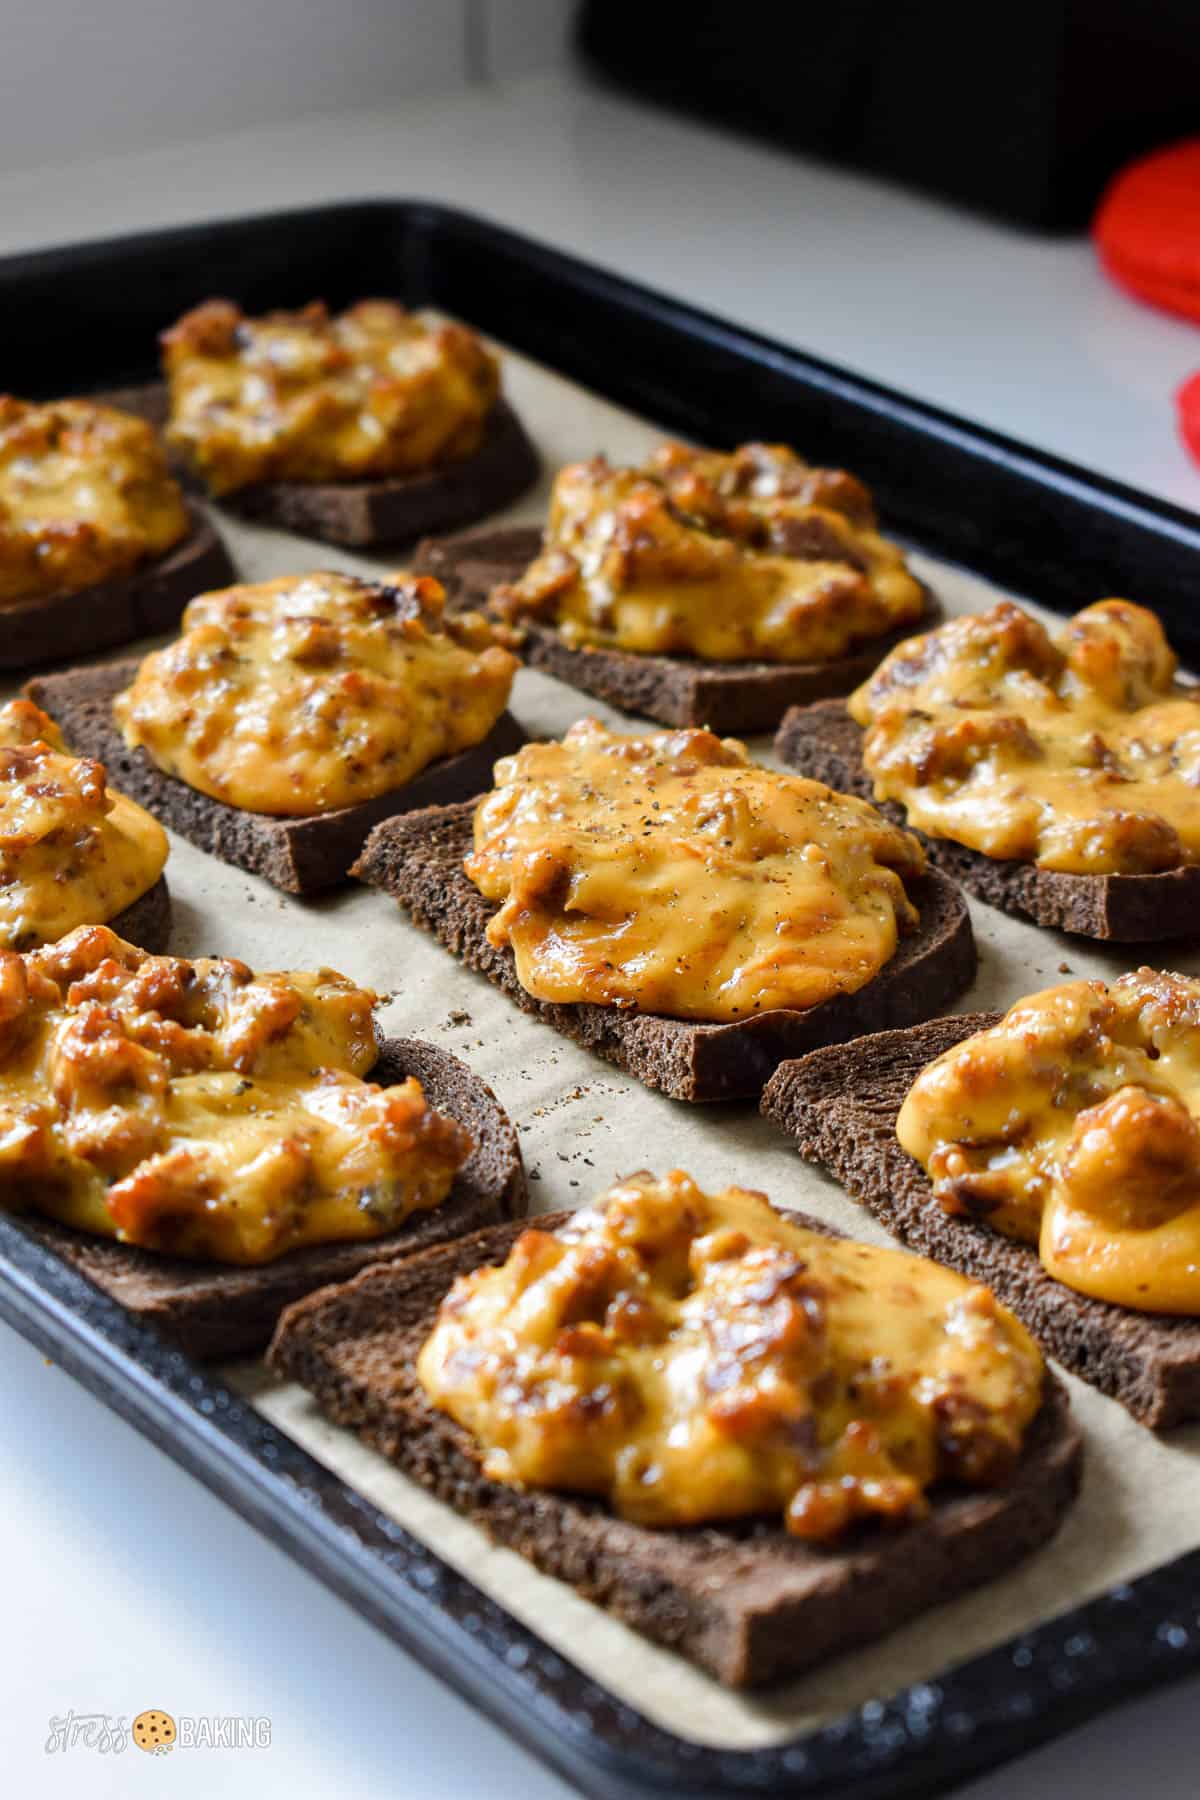 Melted cheese and sausage on slices of pumpernickel bread on a baking sheet